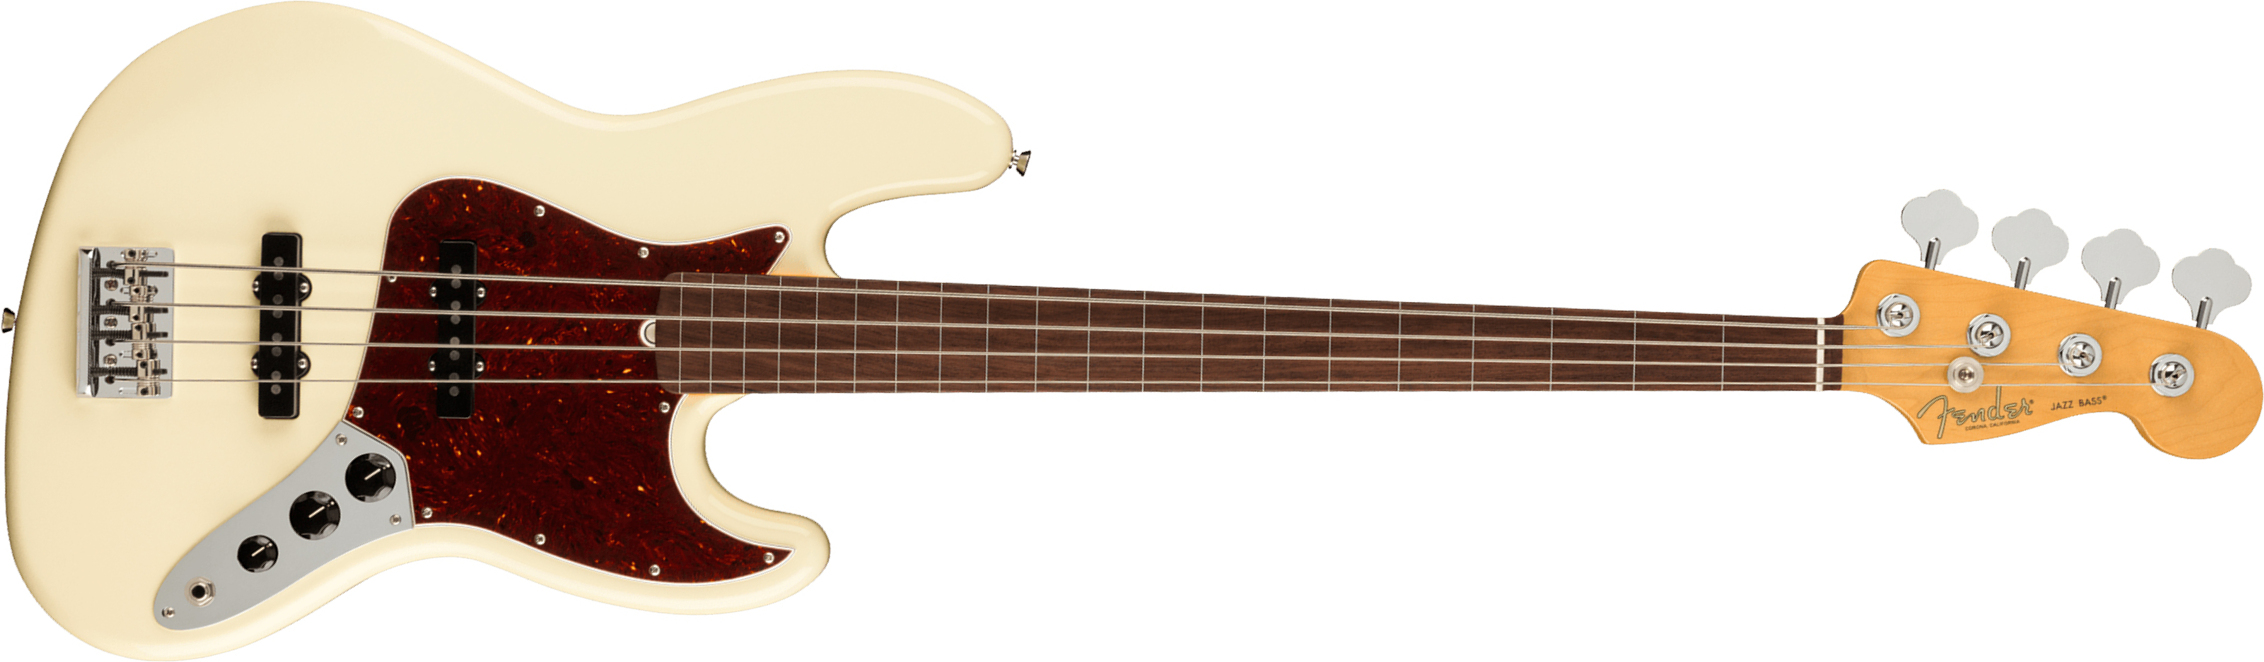 Fender Jazz Bass Fretless American Professional Ii Usa Rw - Olympic White - Solid body elektrische bas - Main picture